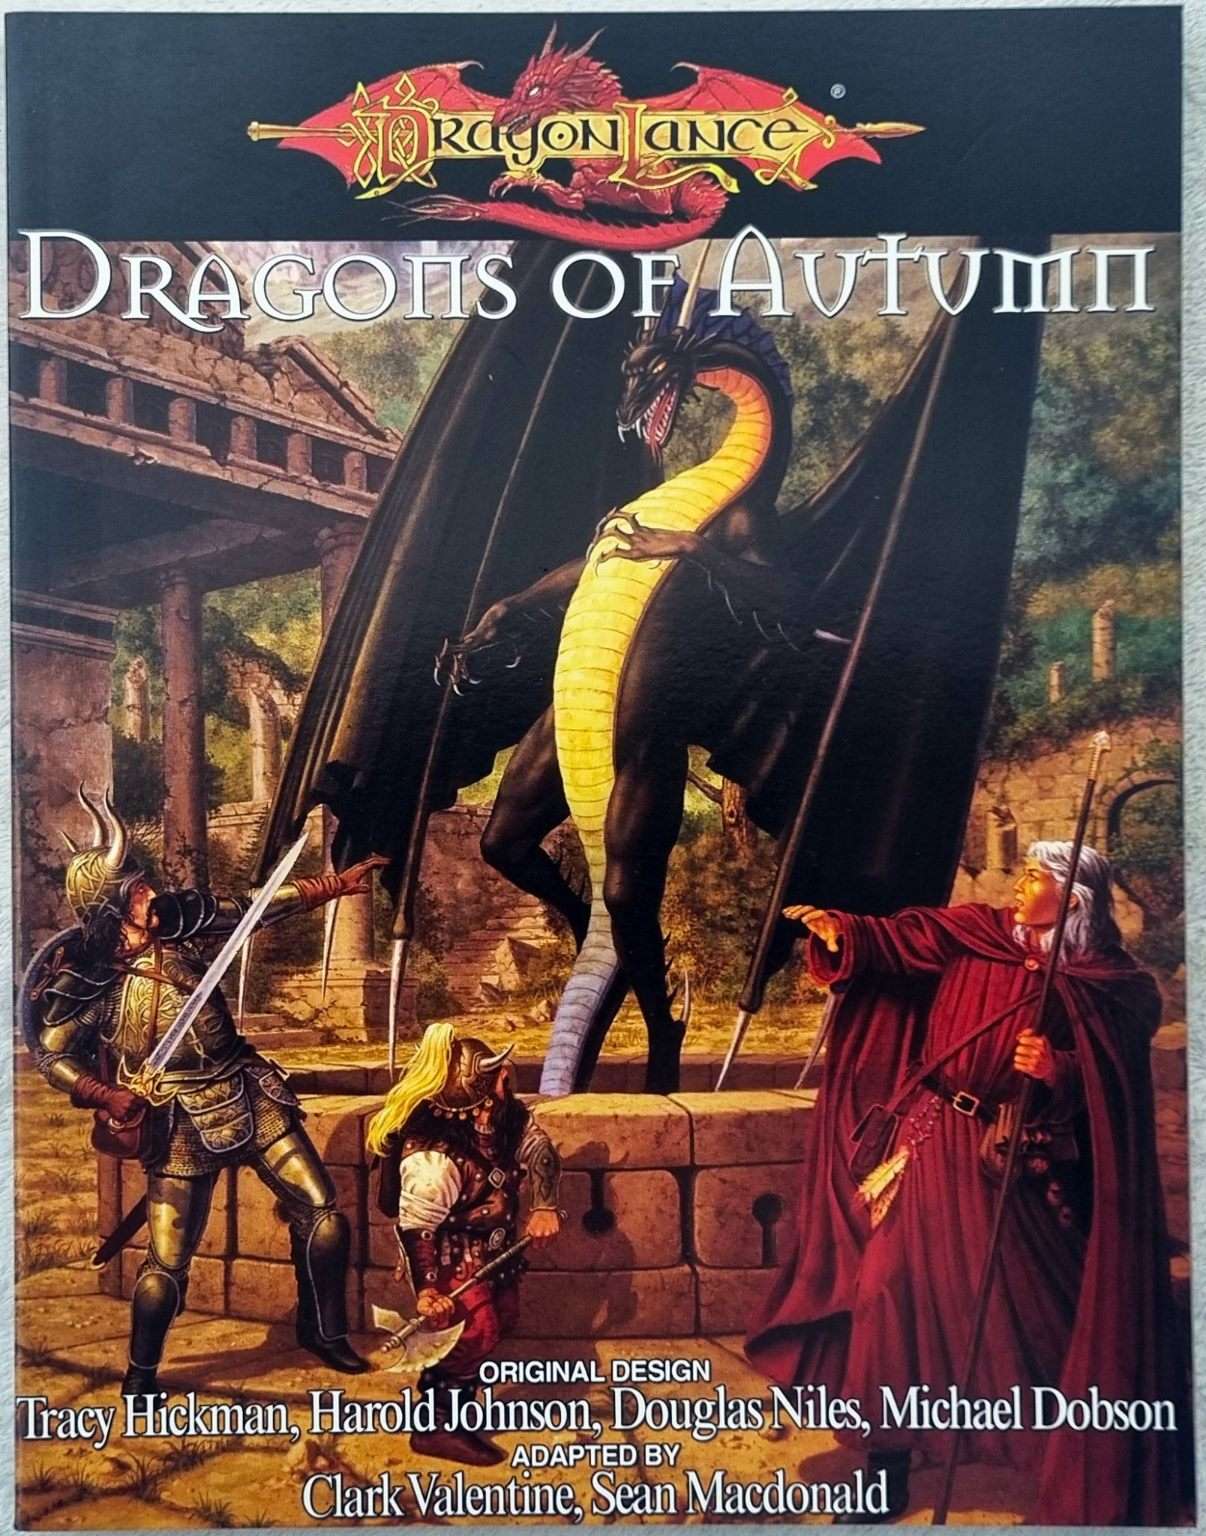 Dungeons and Dragons - Dragonlance: Dragons of Autumn 3.5e